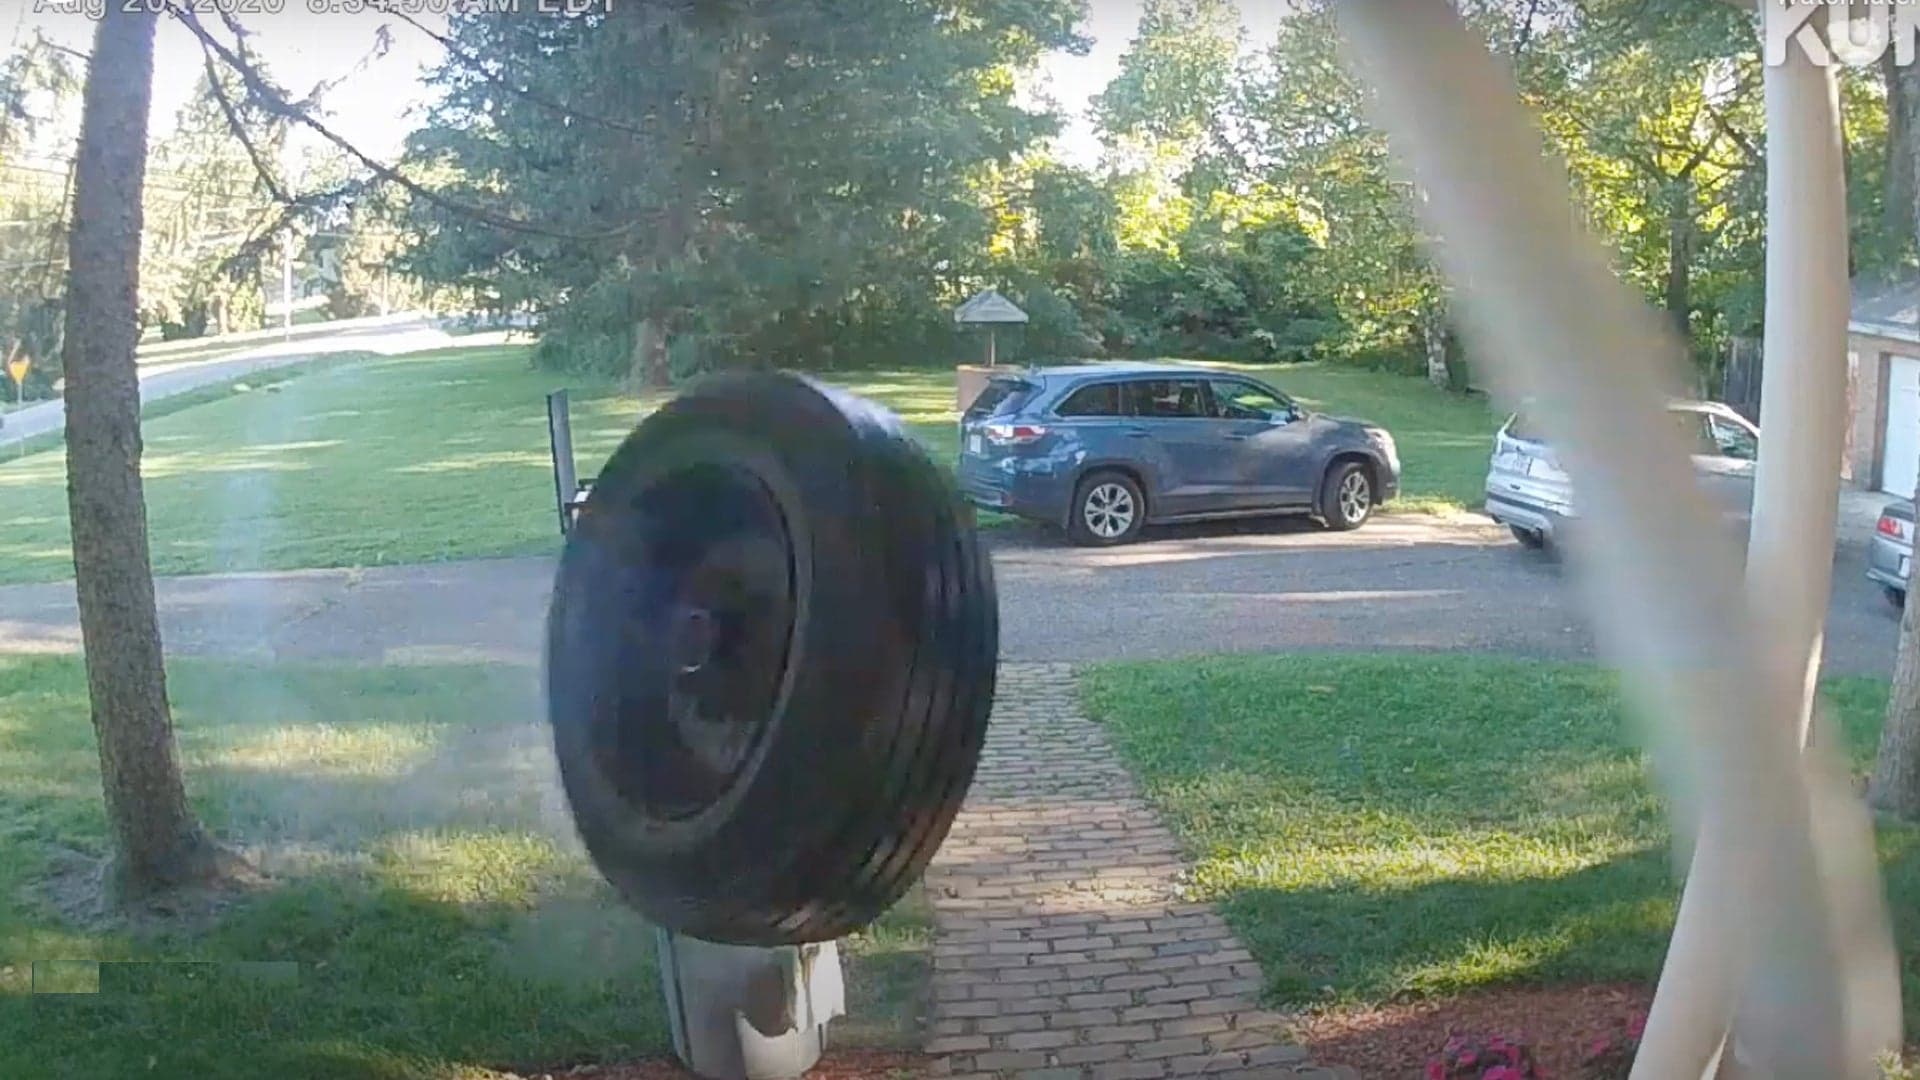 Here’s What Happens When a Runaway Tire Meets a House at 65 MPH